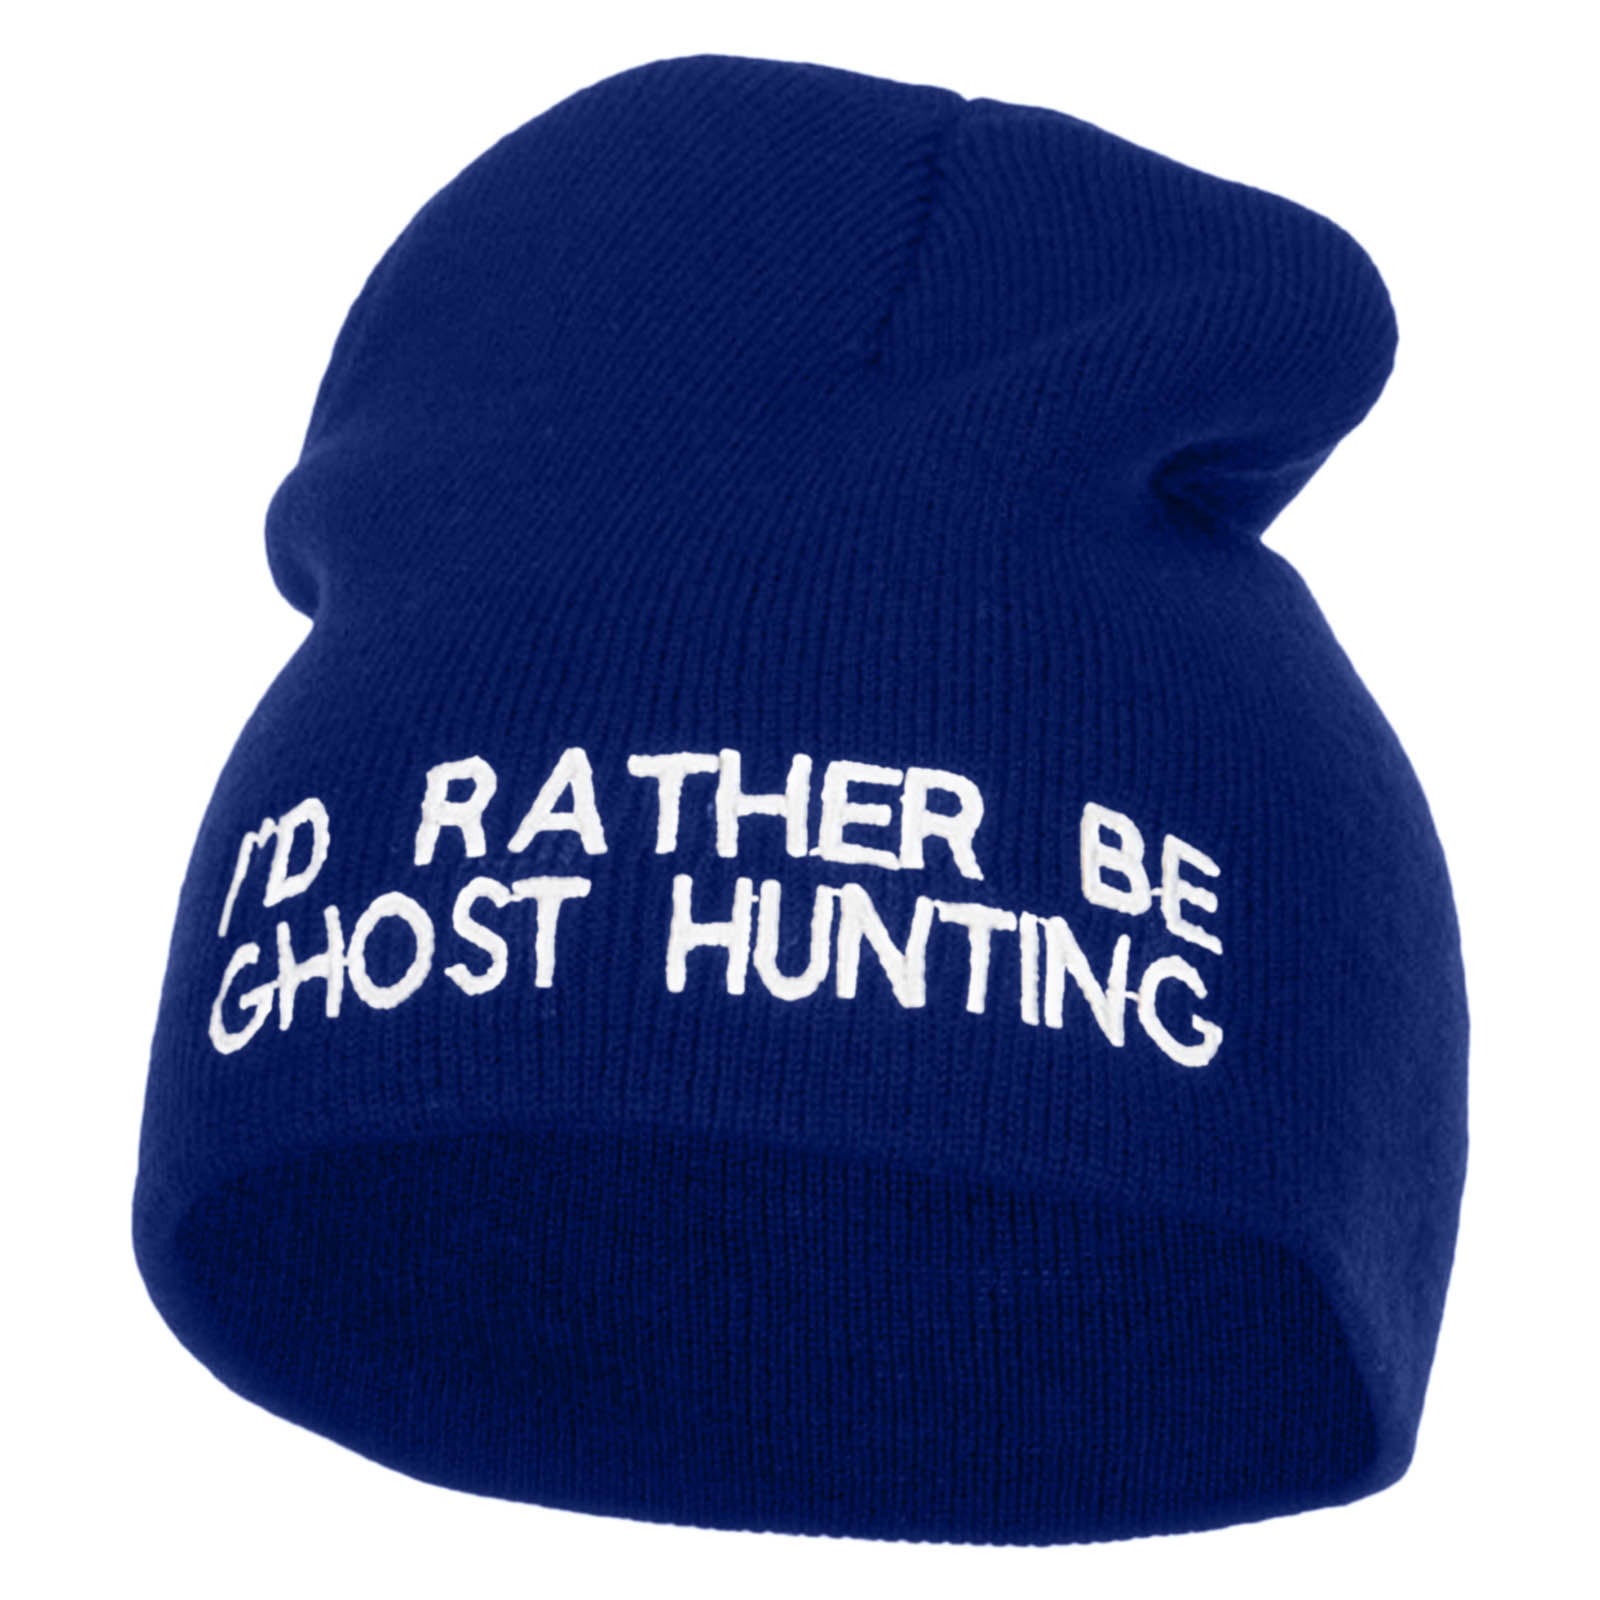 I&#039;d Rather Be Ghost Hunting Short Beanie - Royal OSFM